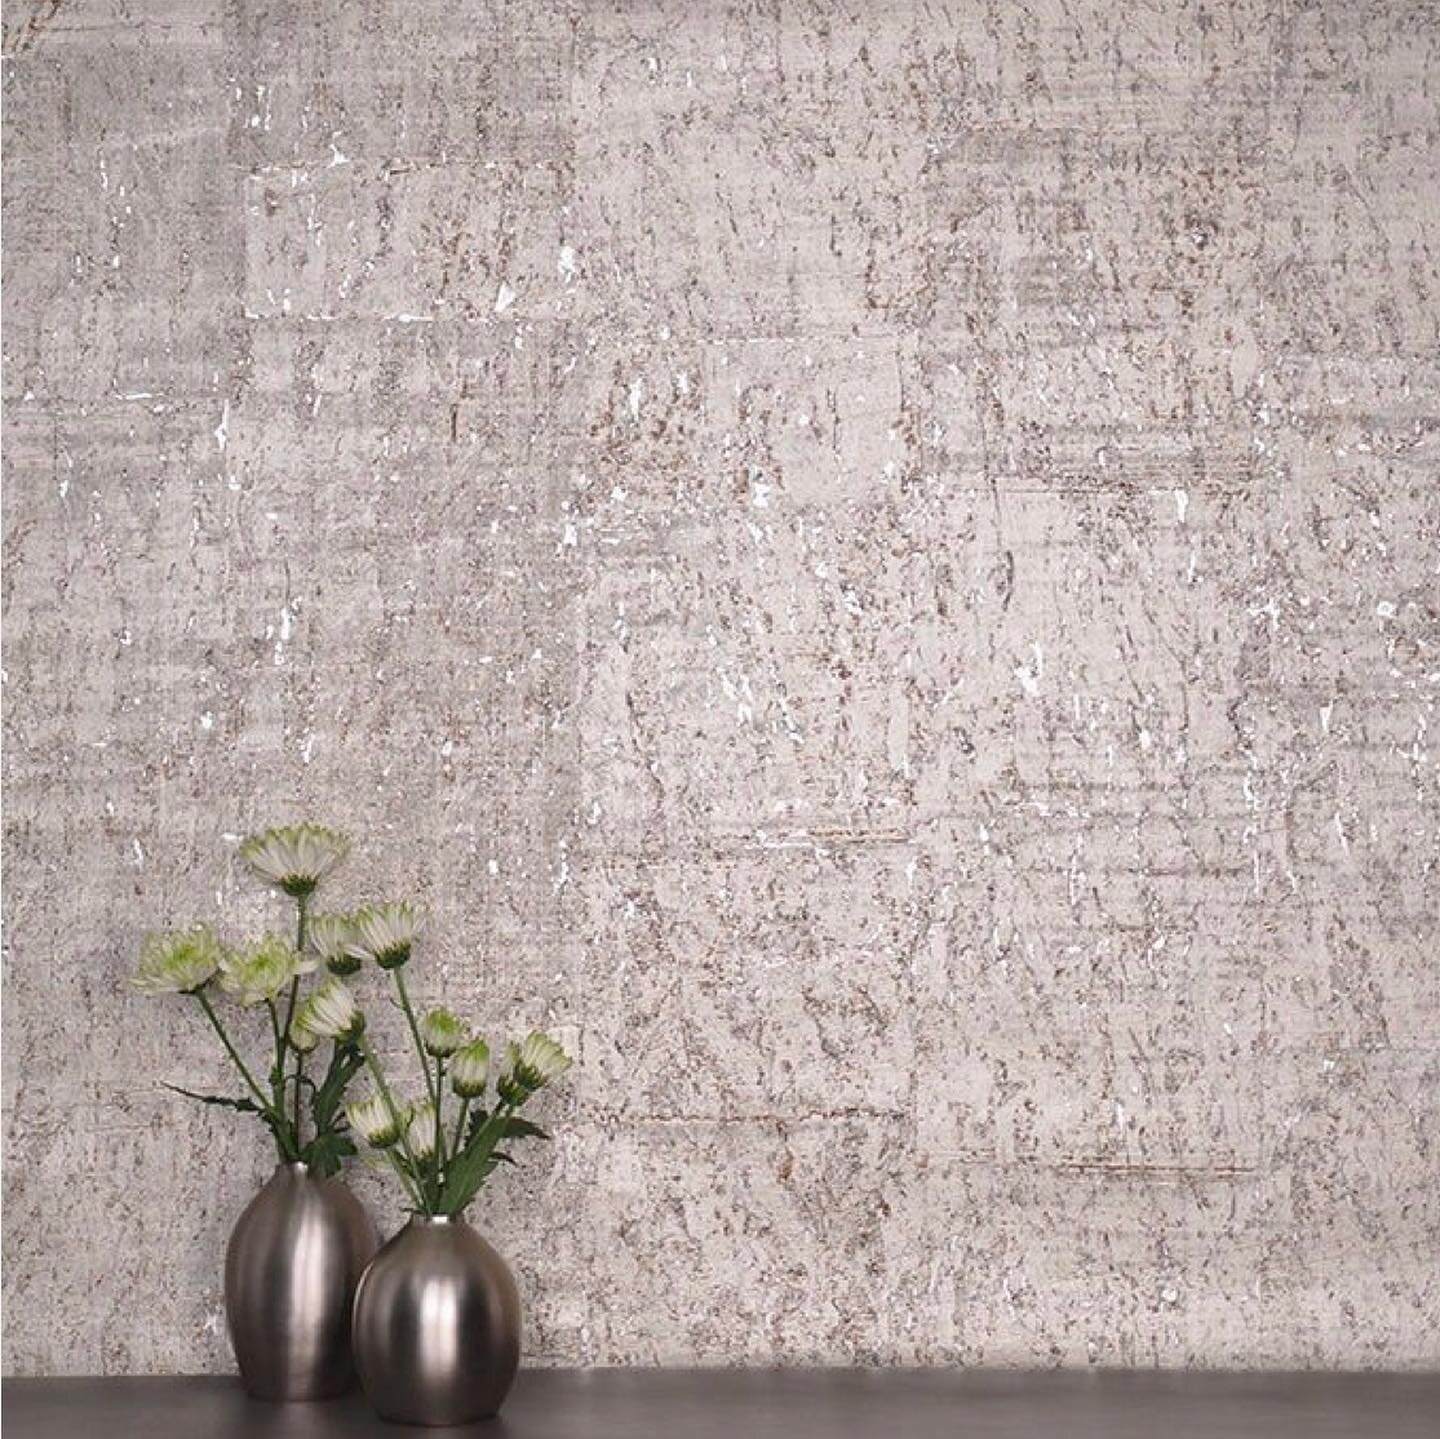 The NEW METALLIC cork board wallpapers...I CANNOT get enough of them!! I feel like my friends are sick of me talking about it, but honestly, these wallpapers look amazing in foyers, master bedrooms, bathrooms and I just put this one in an OFFICE🙌! 
